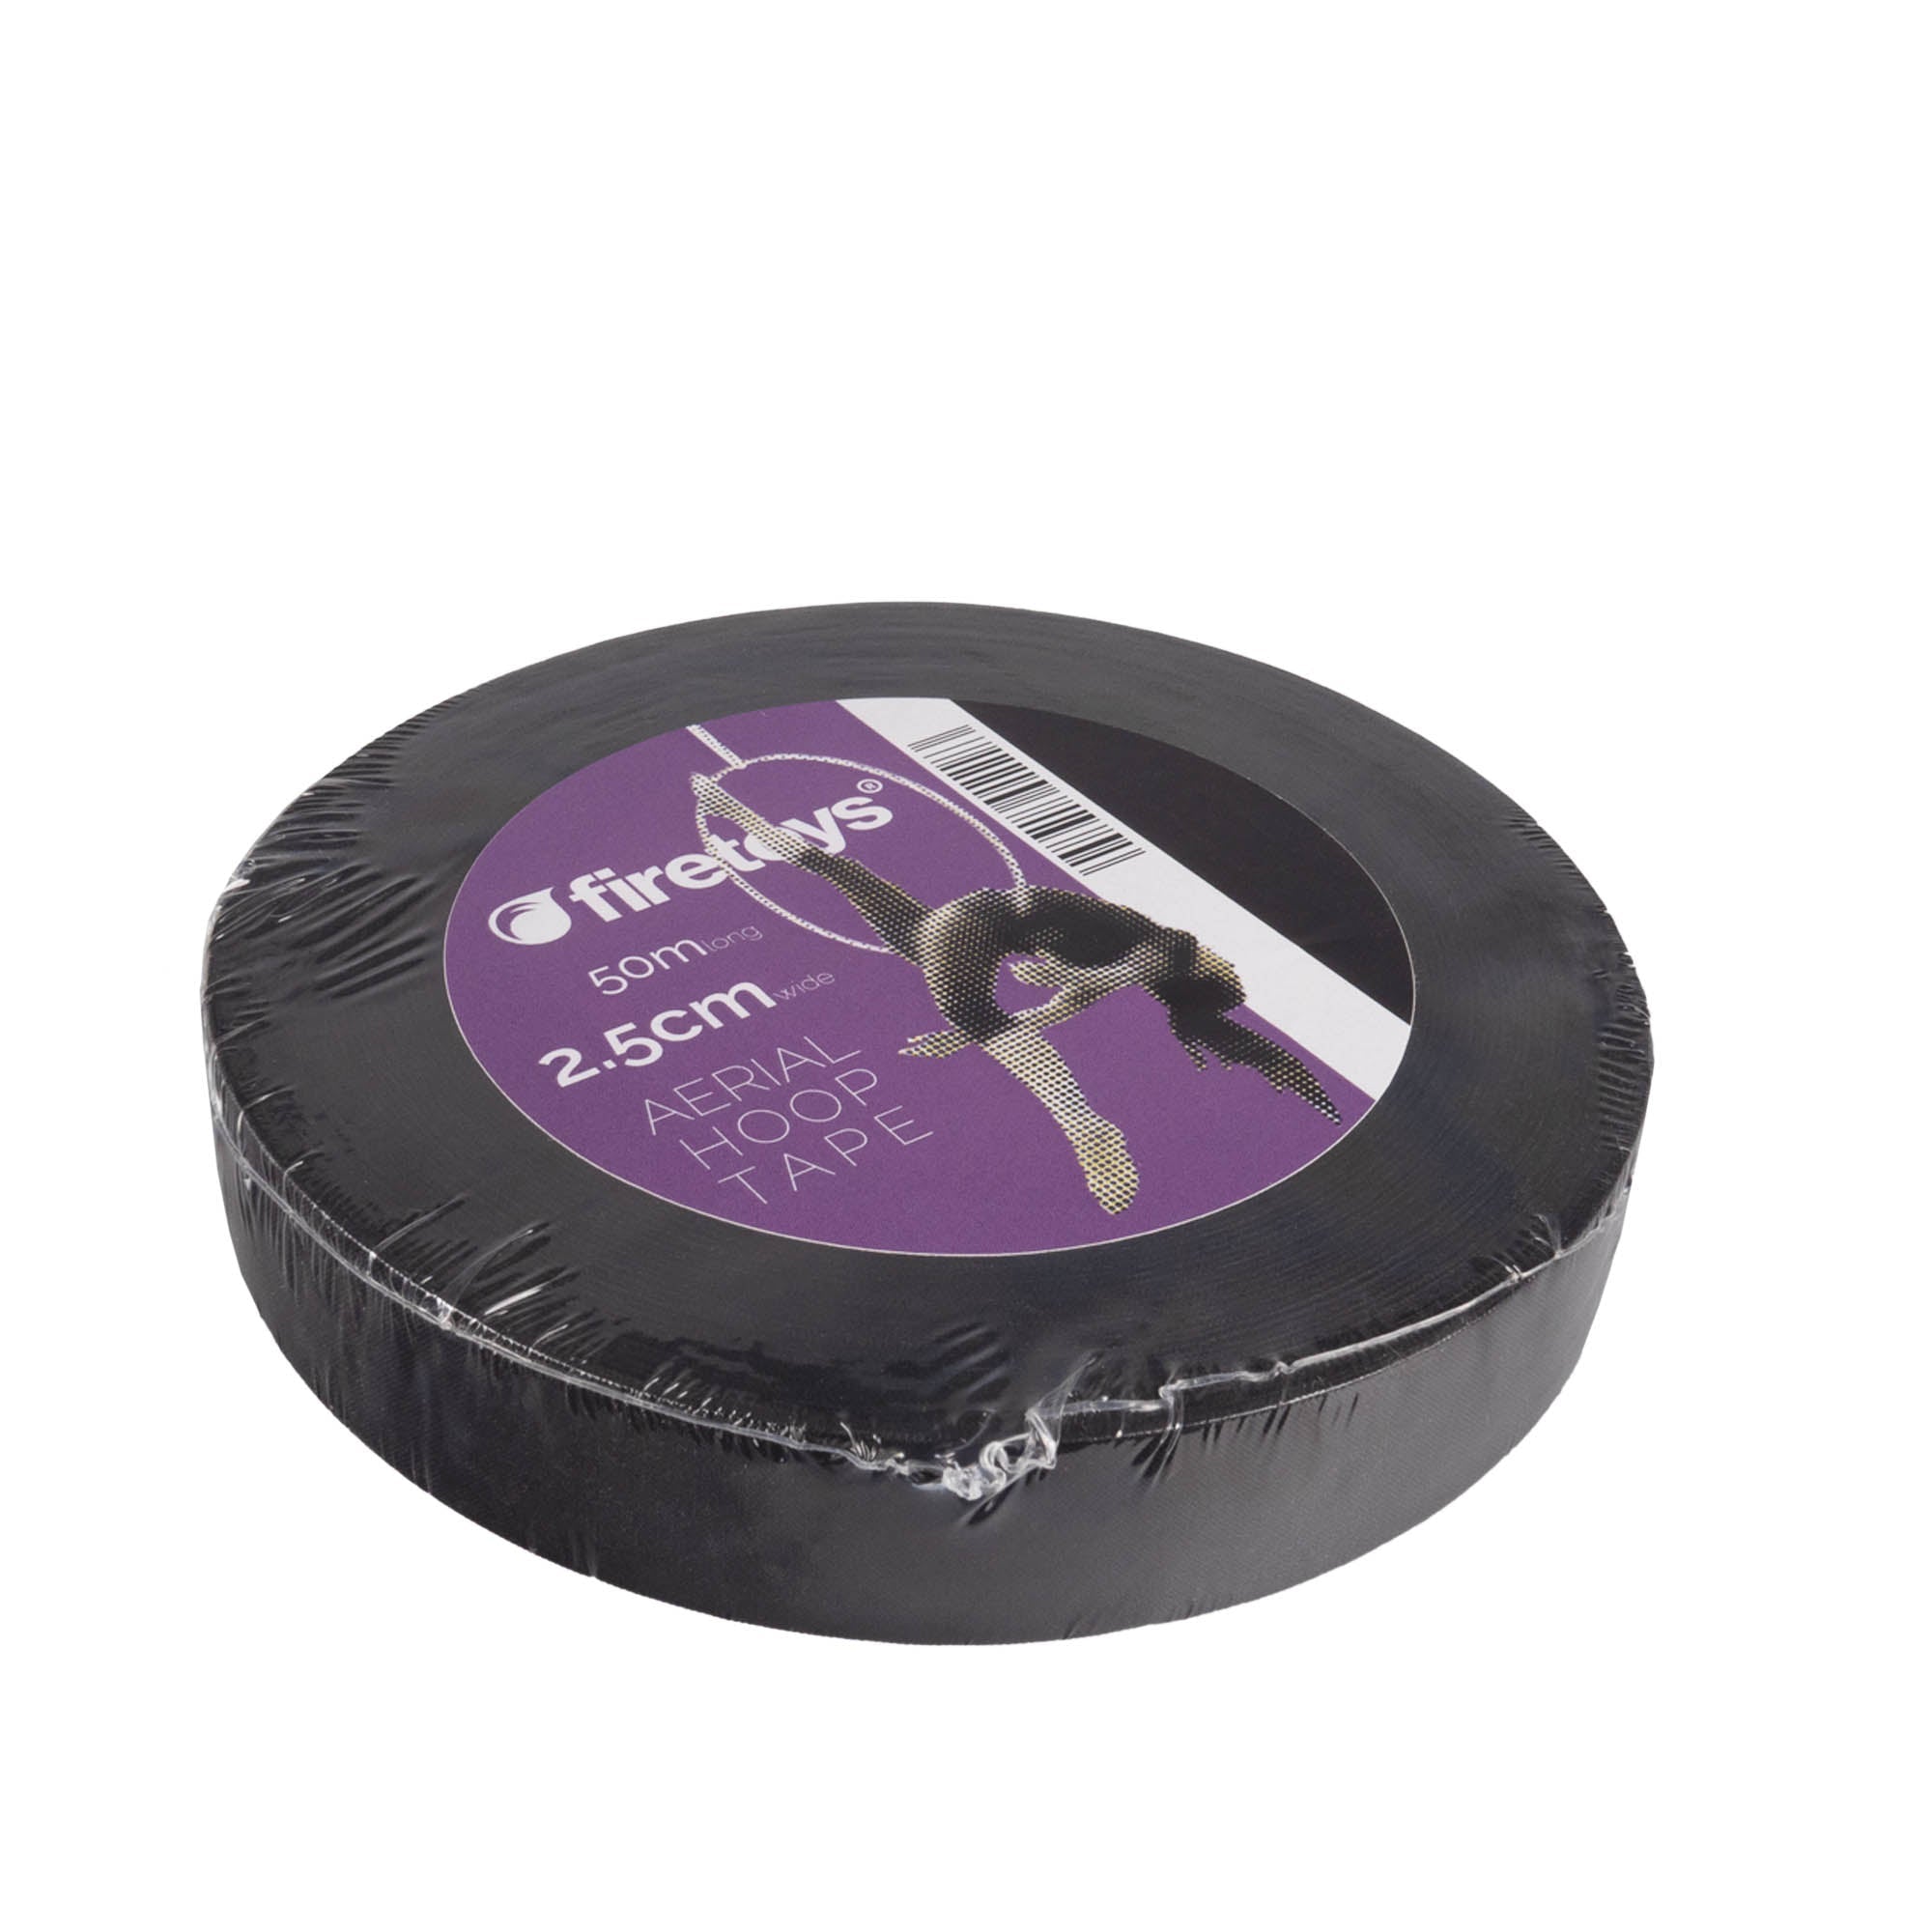 packaged roll of 2.5cm wide tape